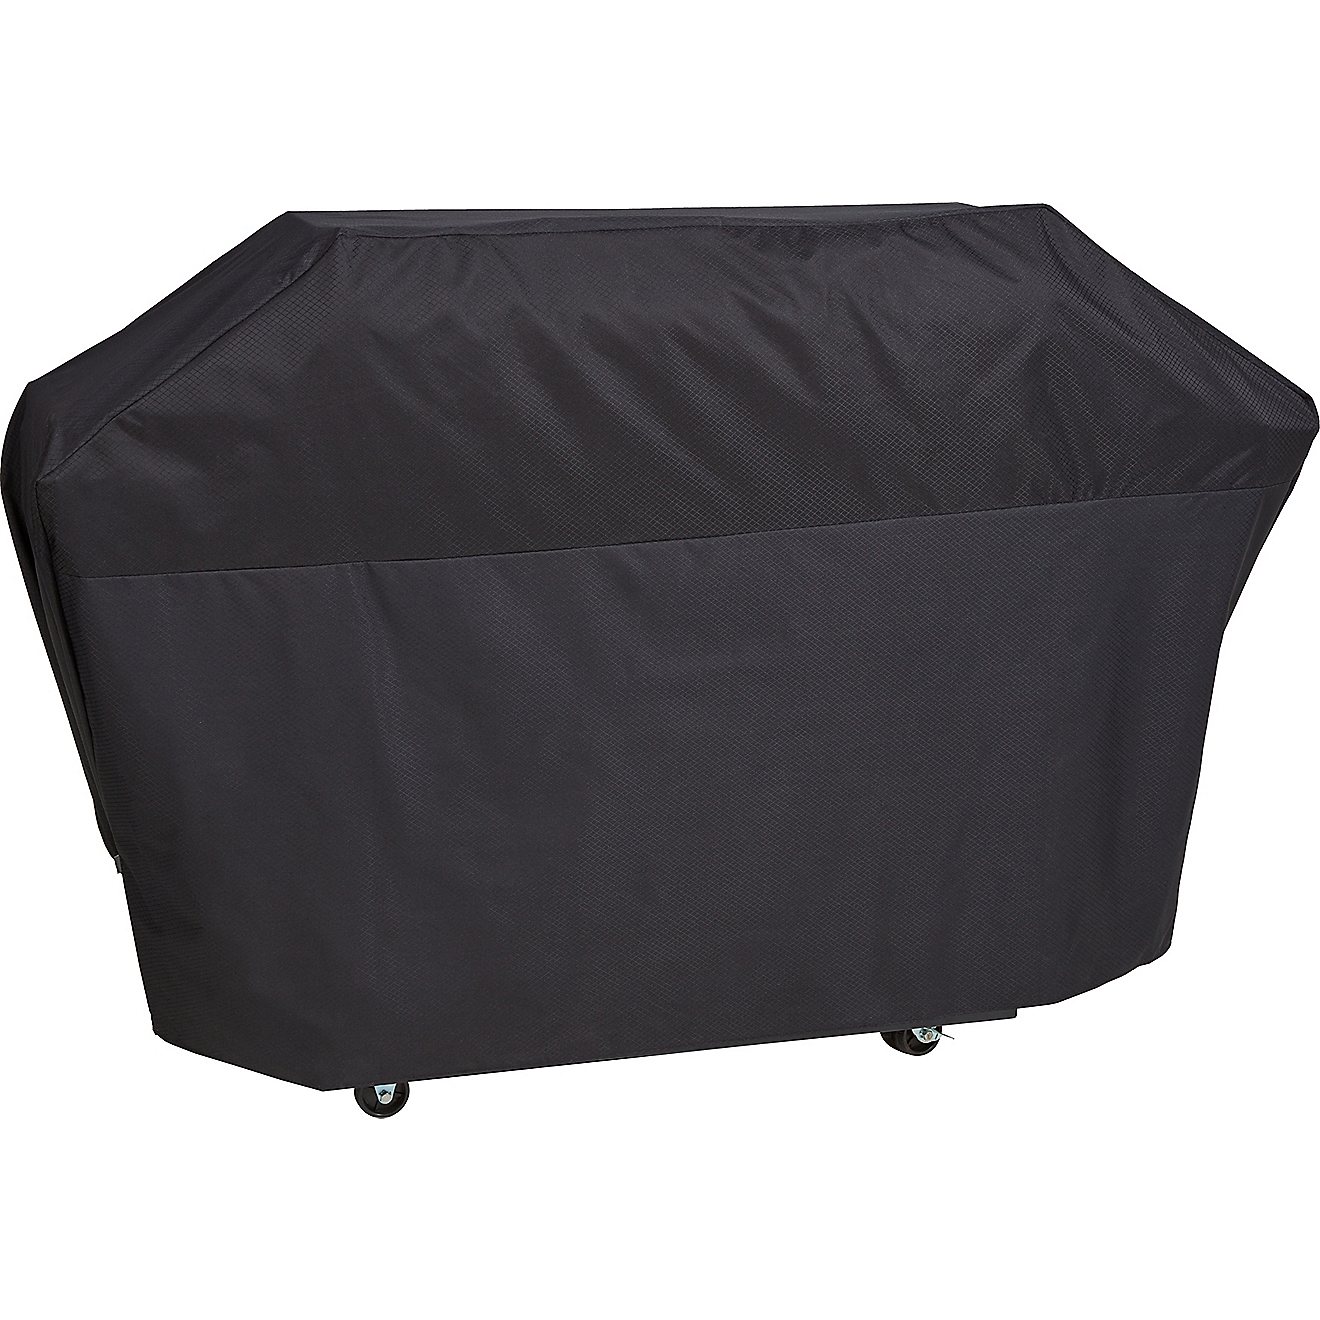 Frigidaire GC26DB 26-Inch Grill Cover Sporting Goods Small ...